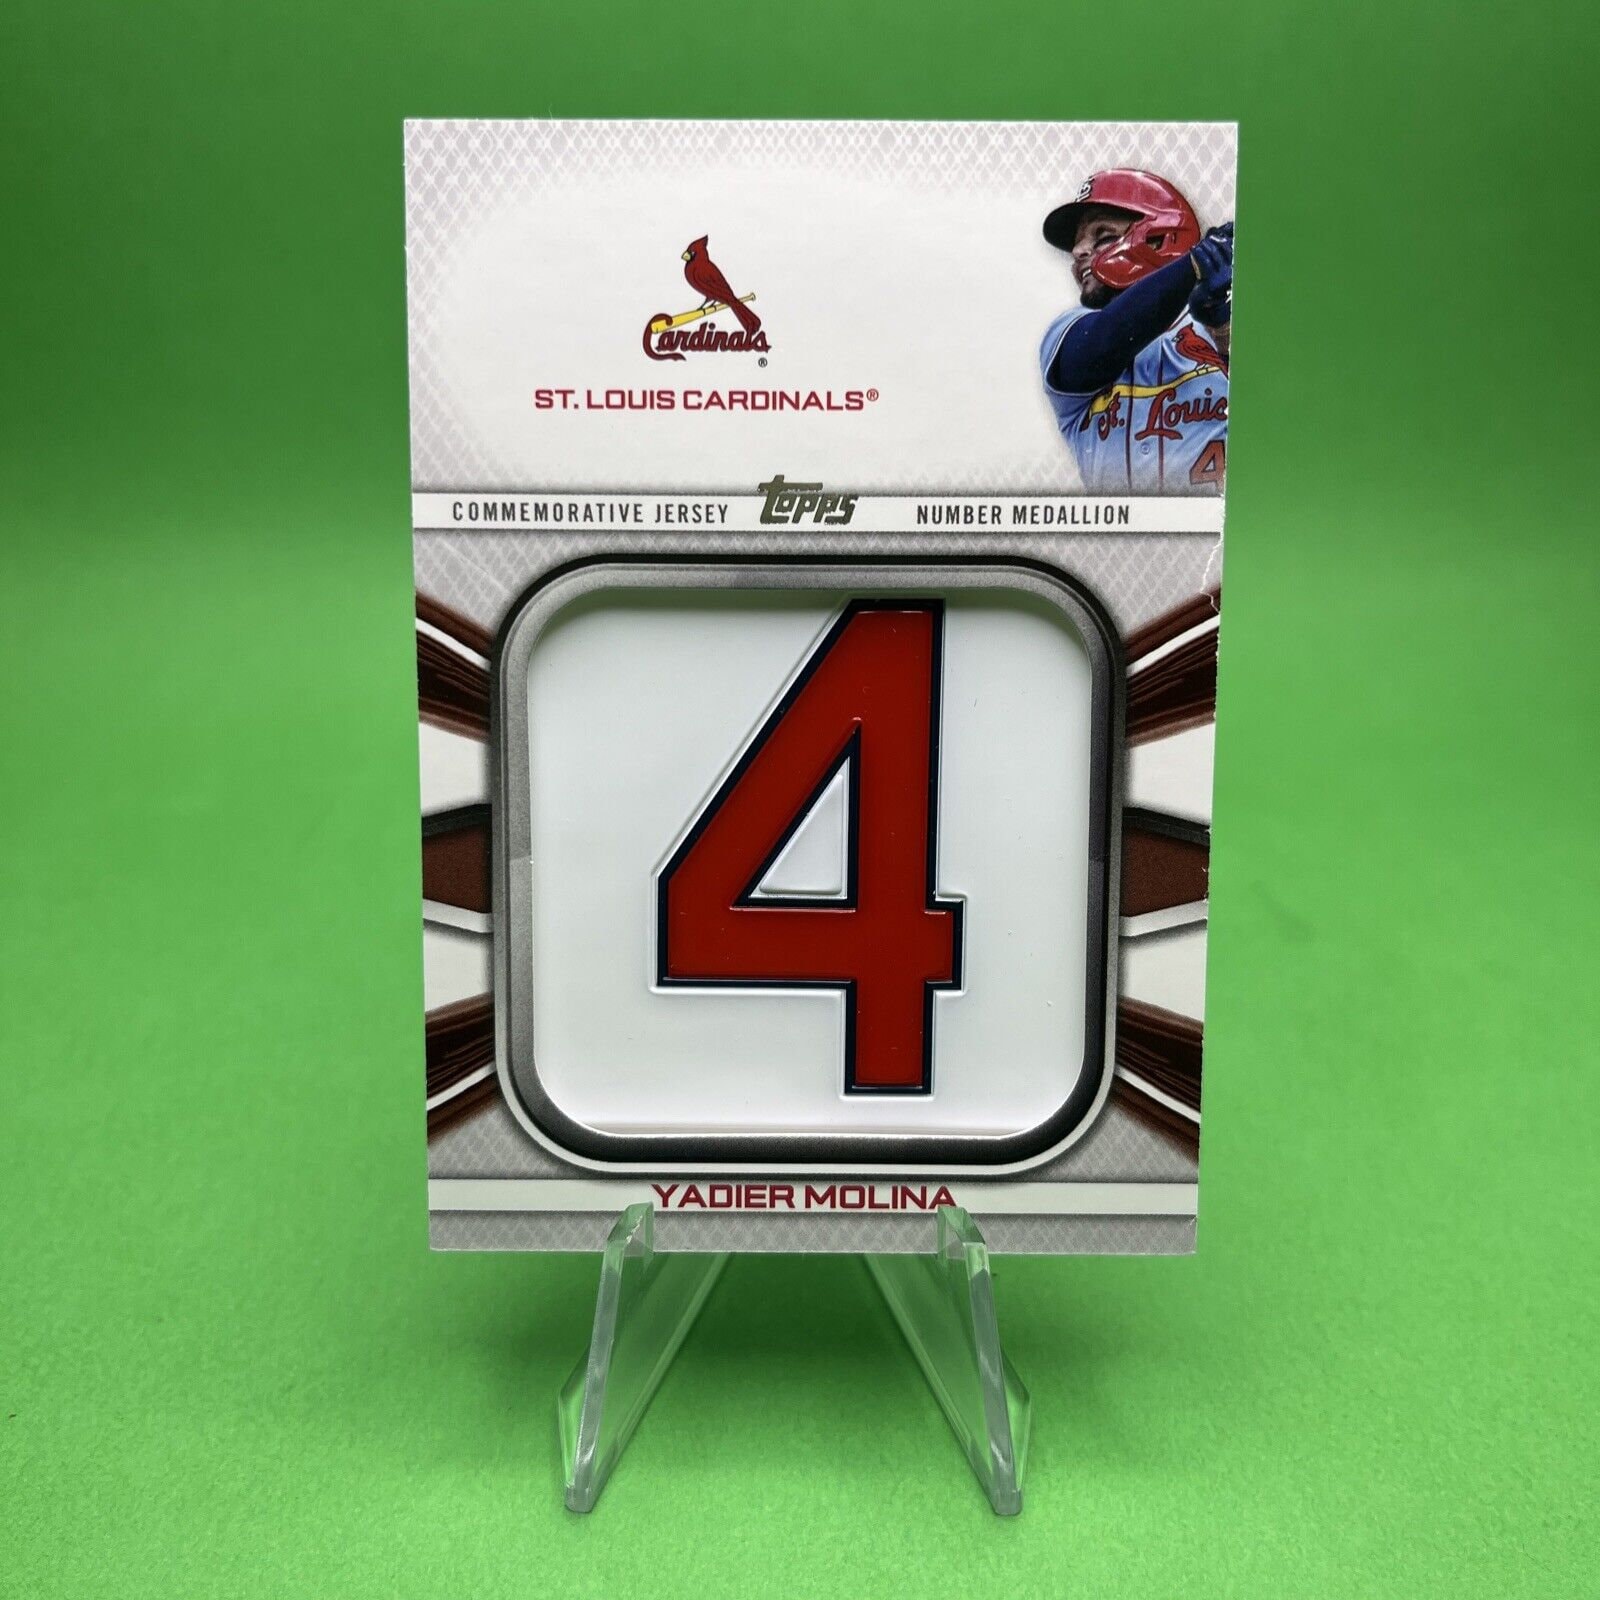 Yadier Molina Jersey Number Medallion Card Collectors Limited 